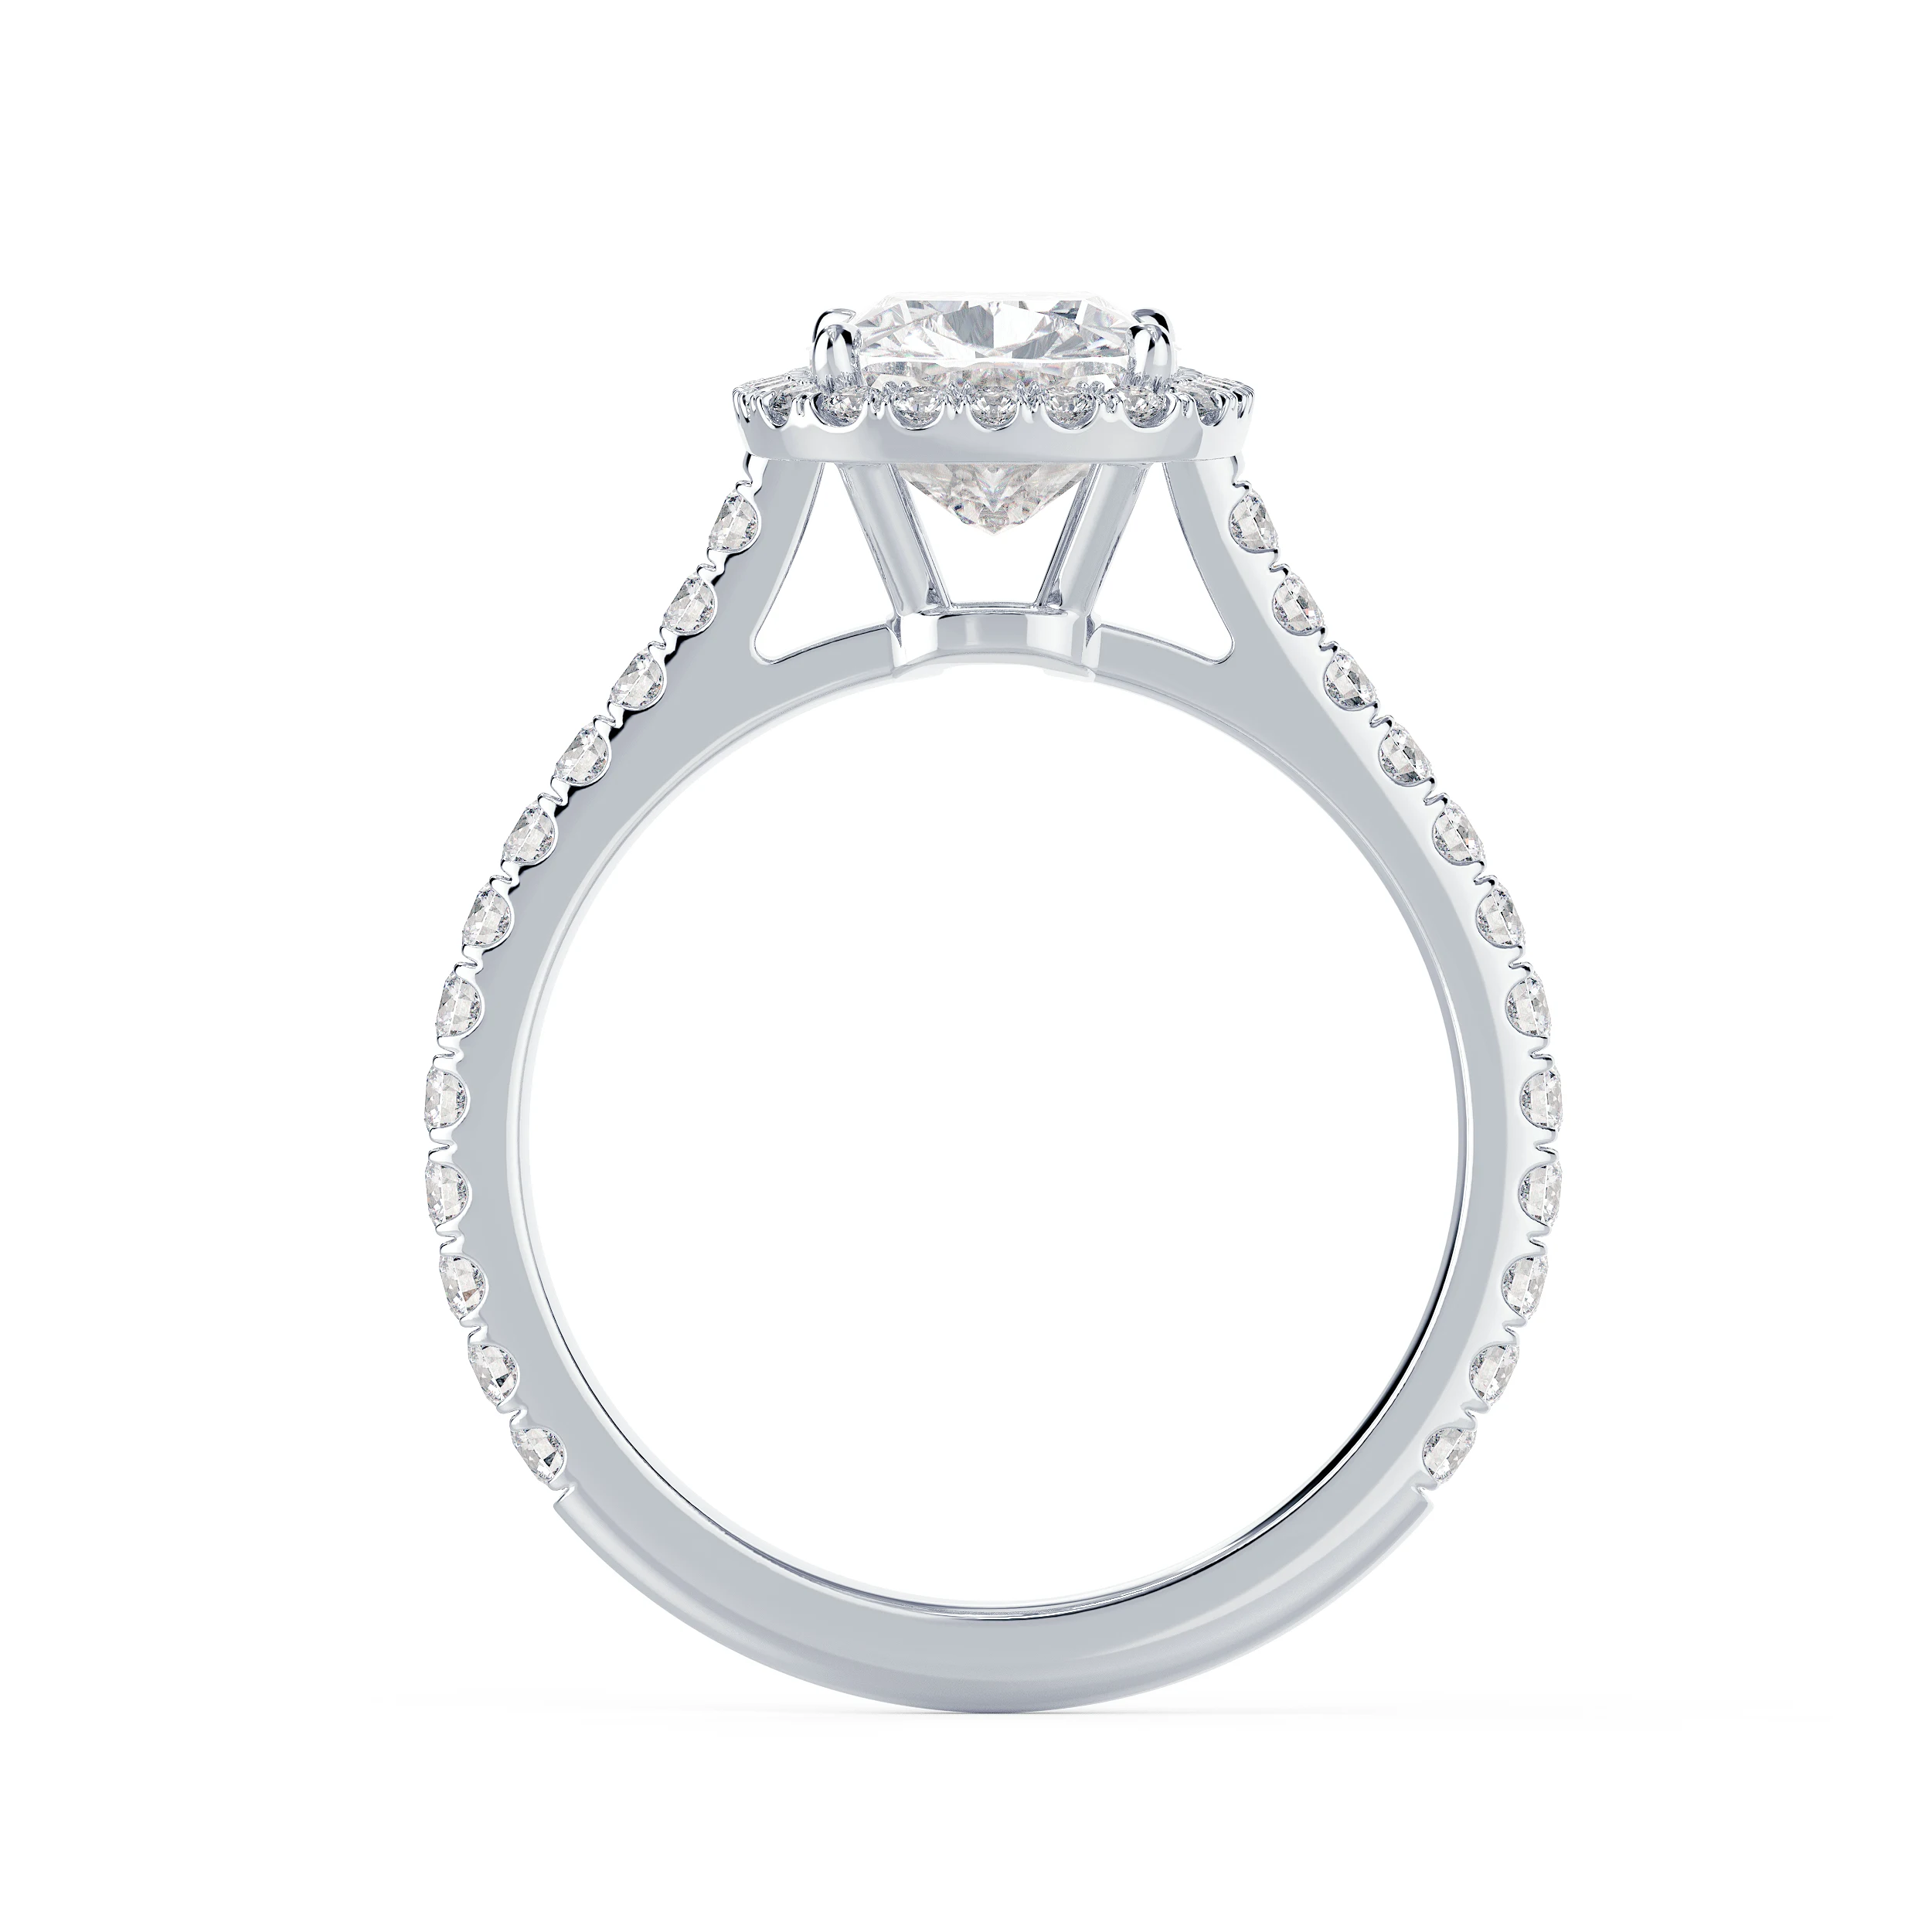 Exceptional Quality Lab Grown Diamonds set in White Gold Cushion Halo Pavé Diamond Engagement Ring (Profile View)